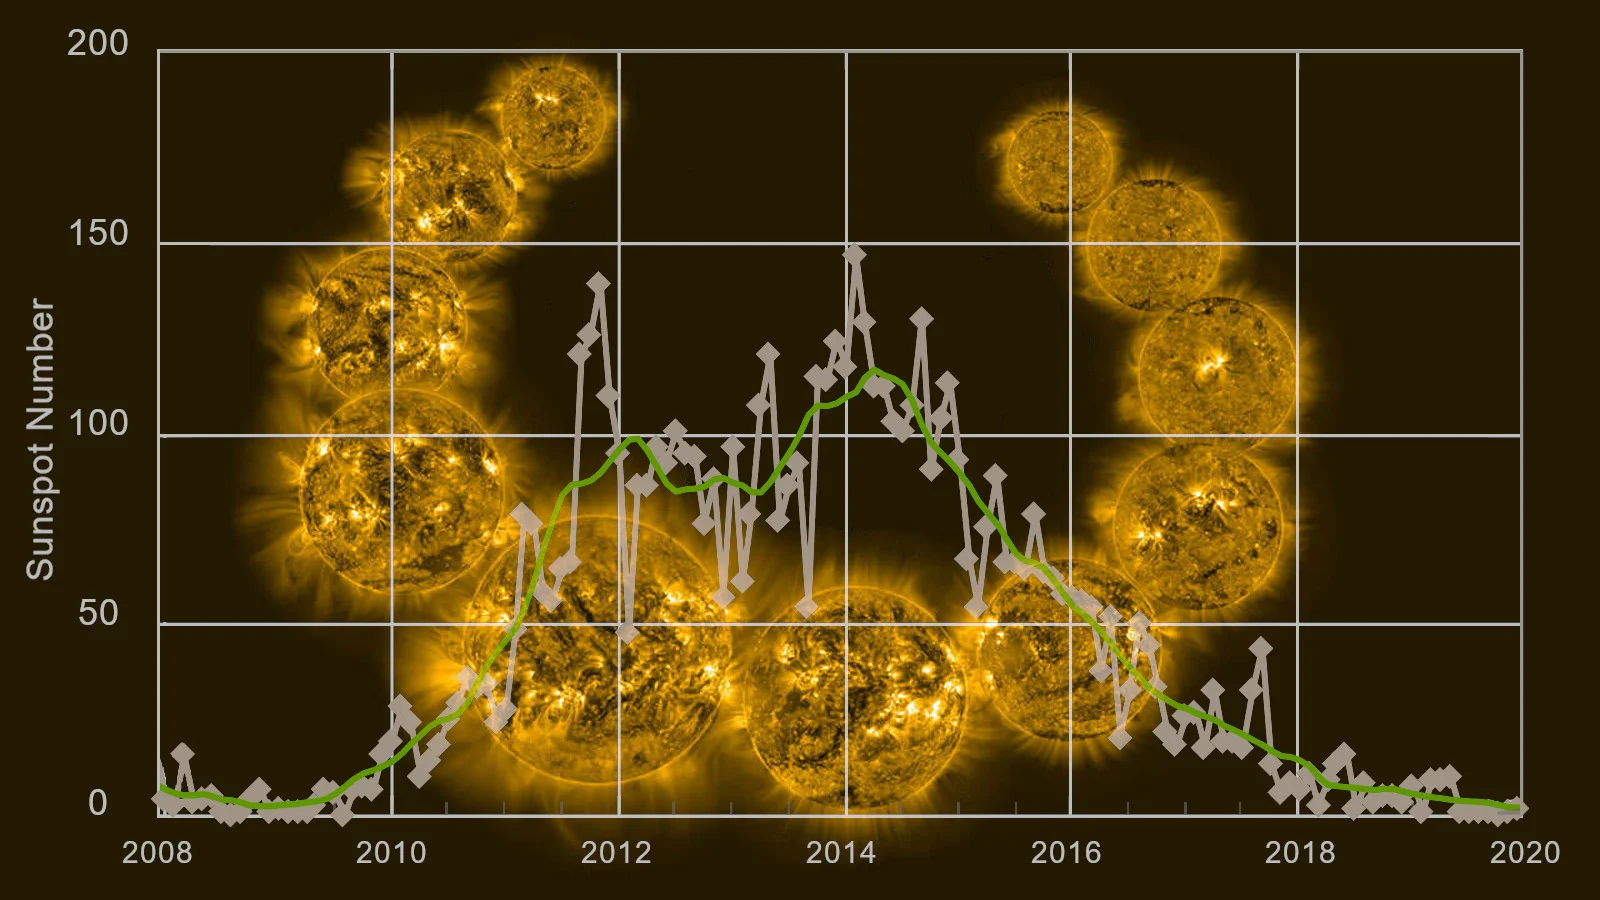 Solar cycle 24 with graph from 2010-2020